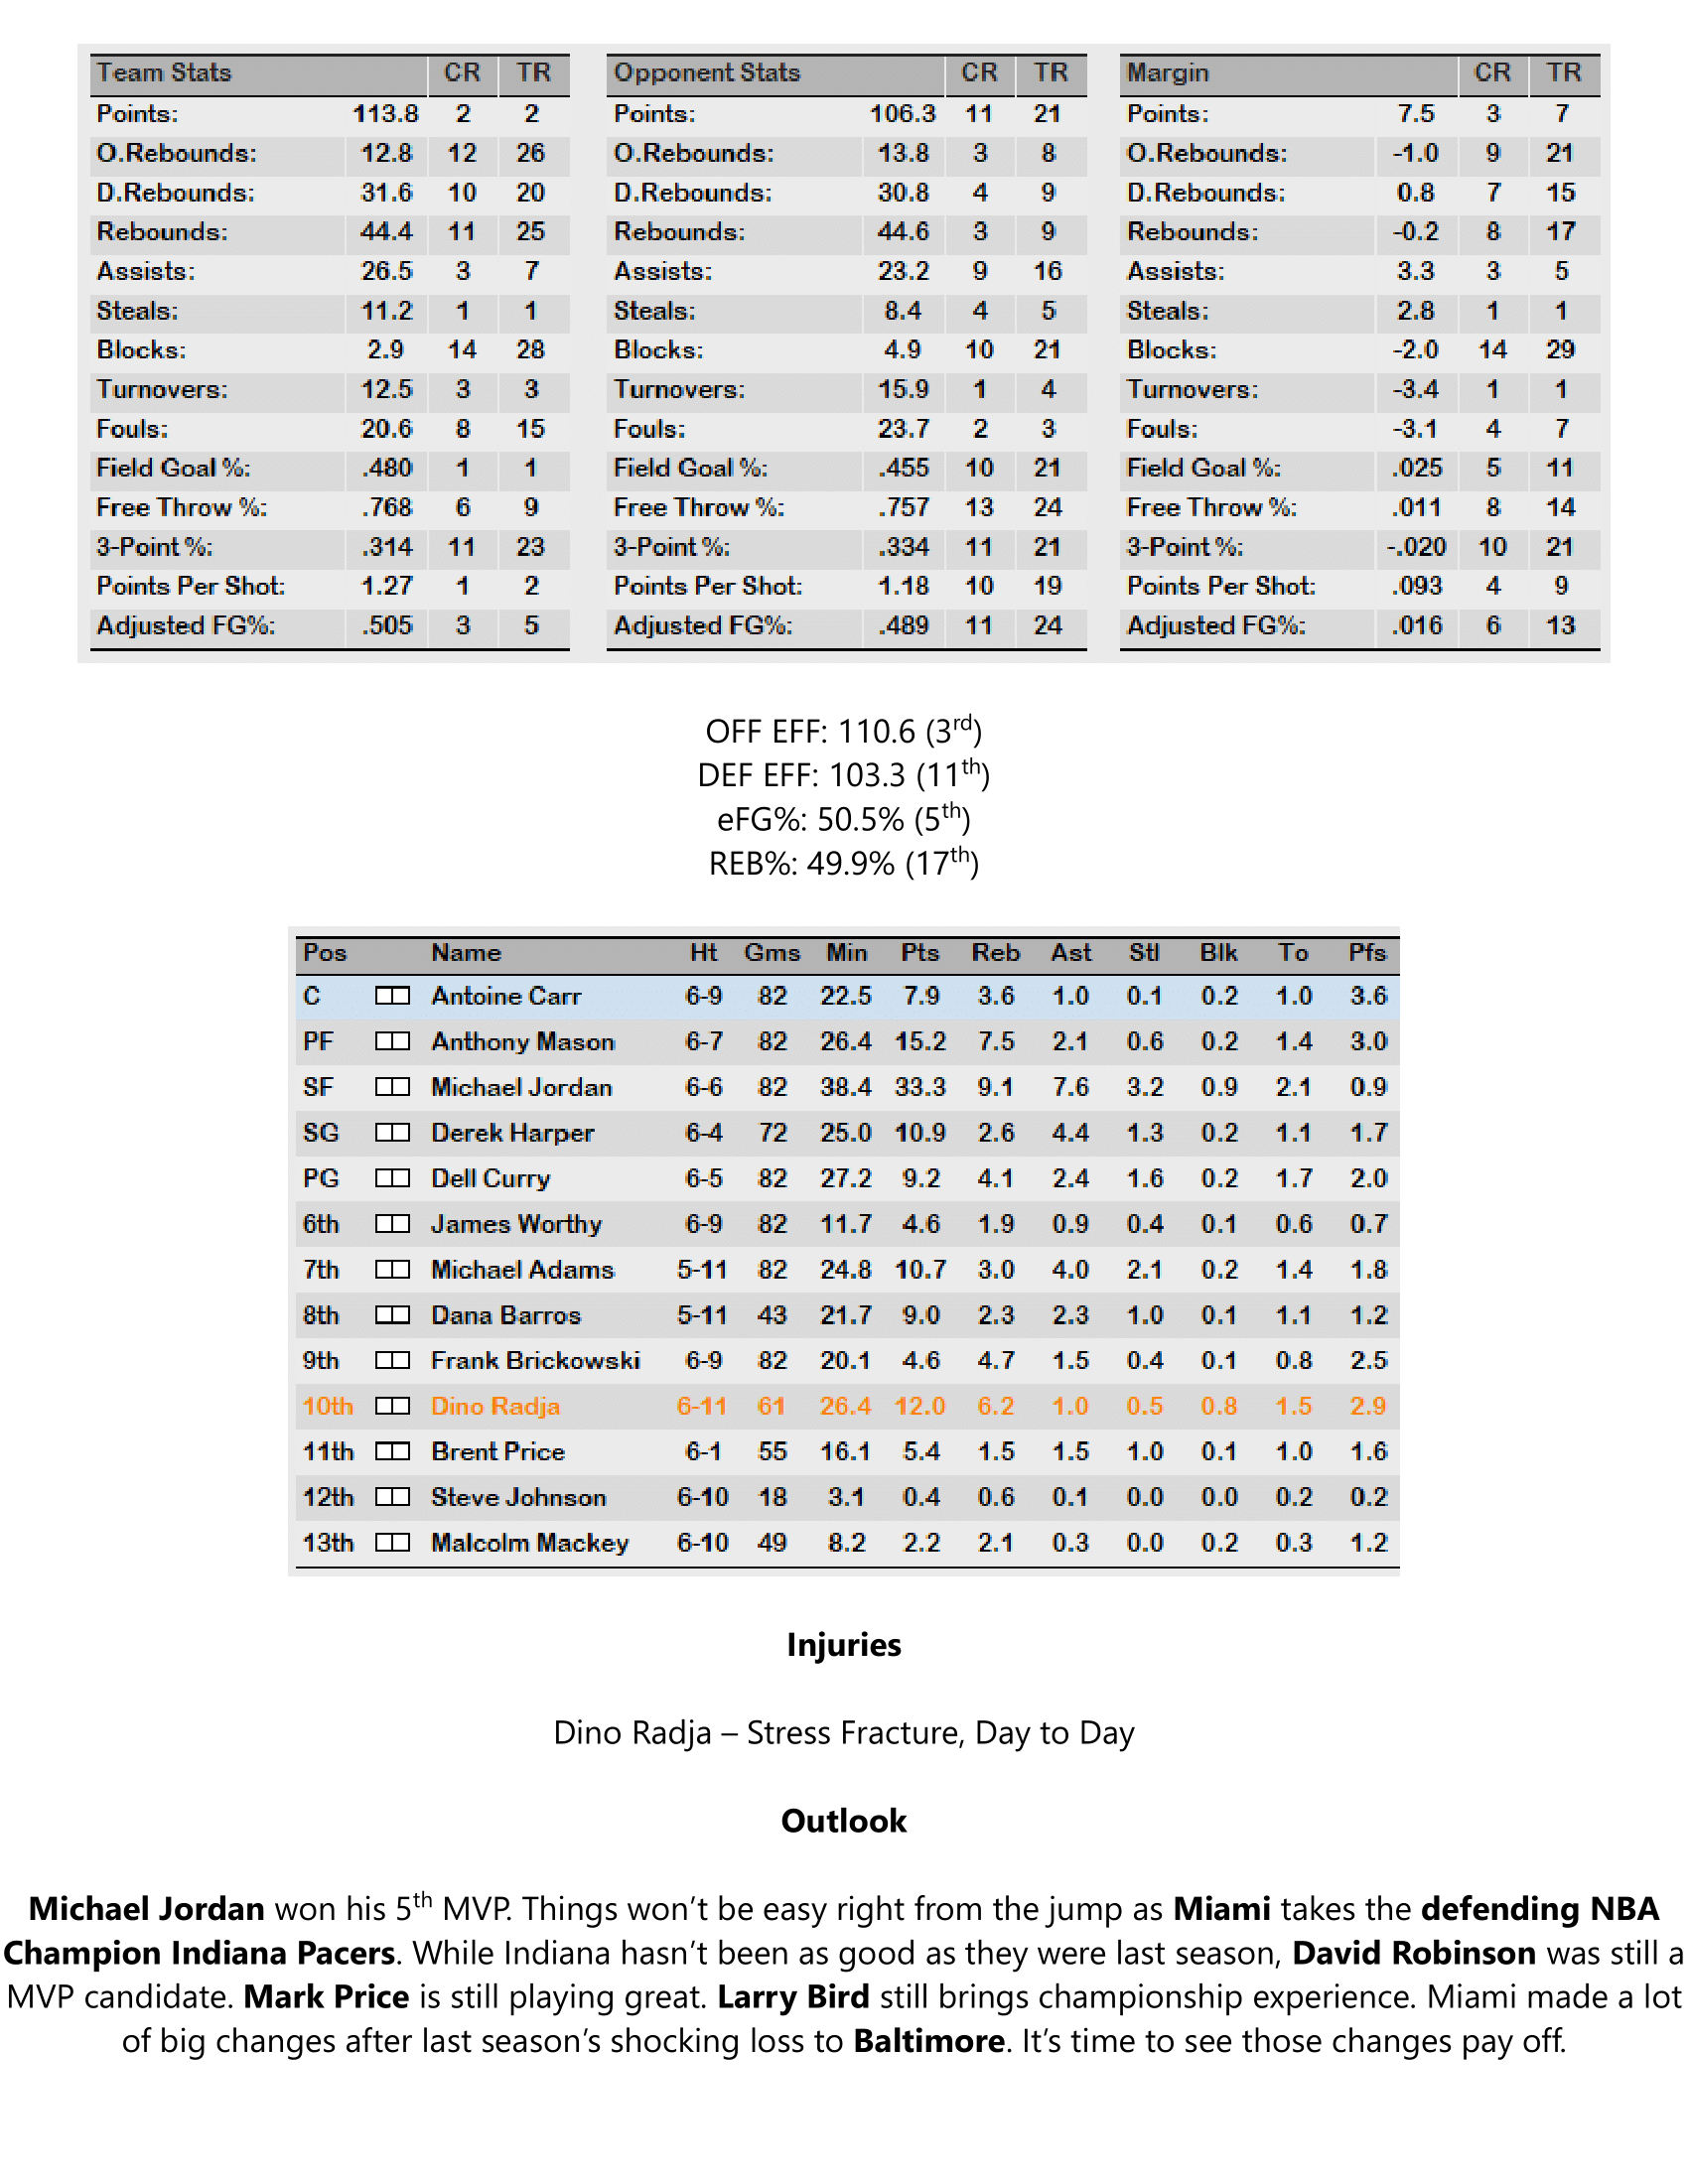 93-94-Part-4-Playoff-Preview-19.png